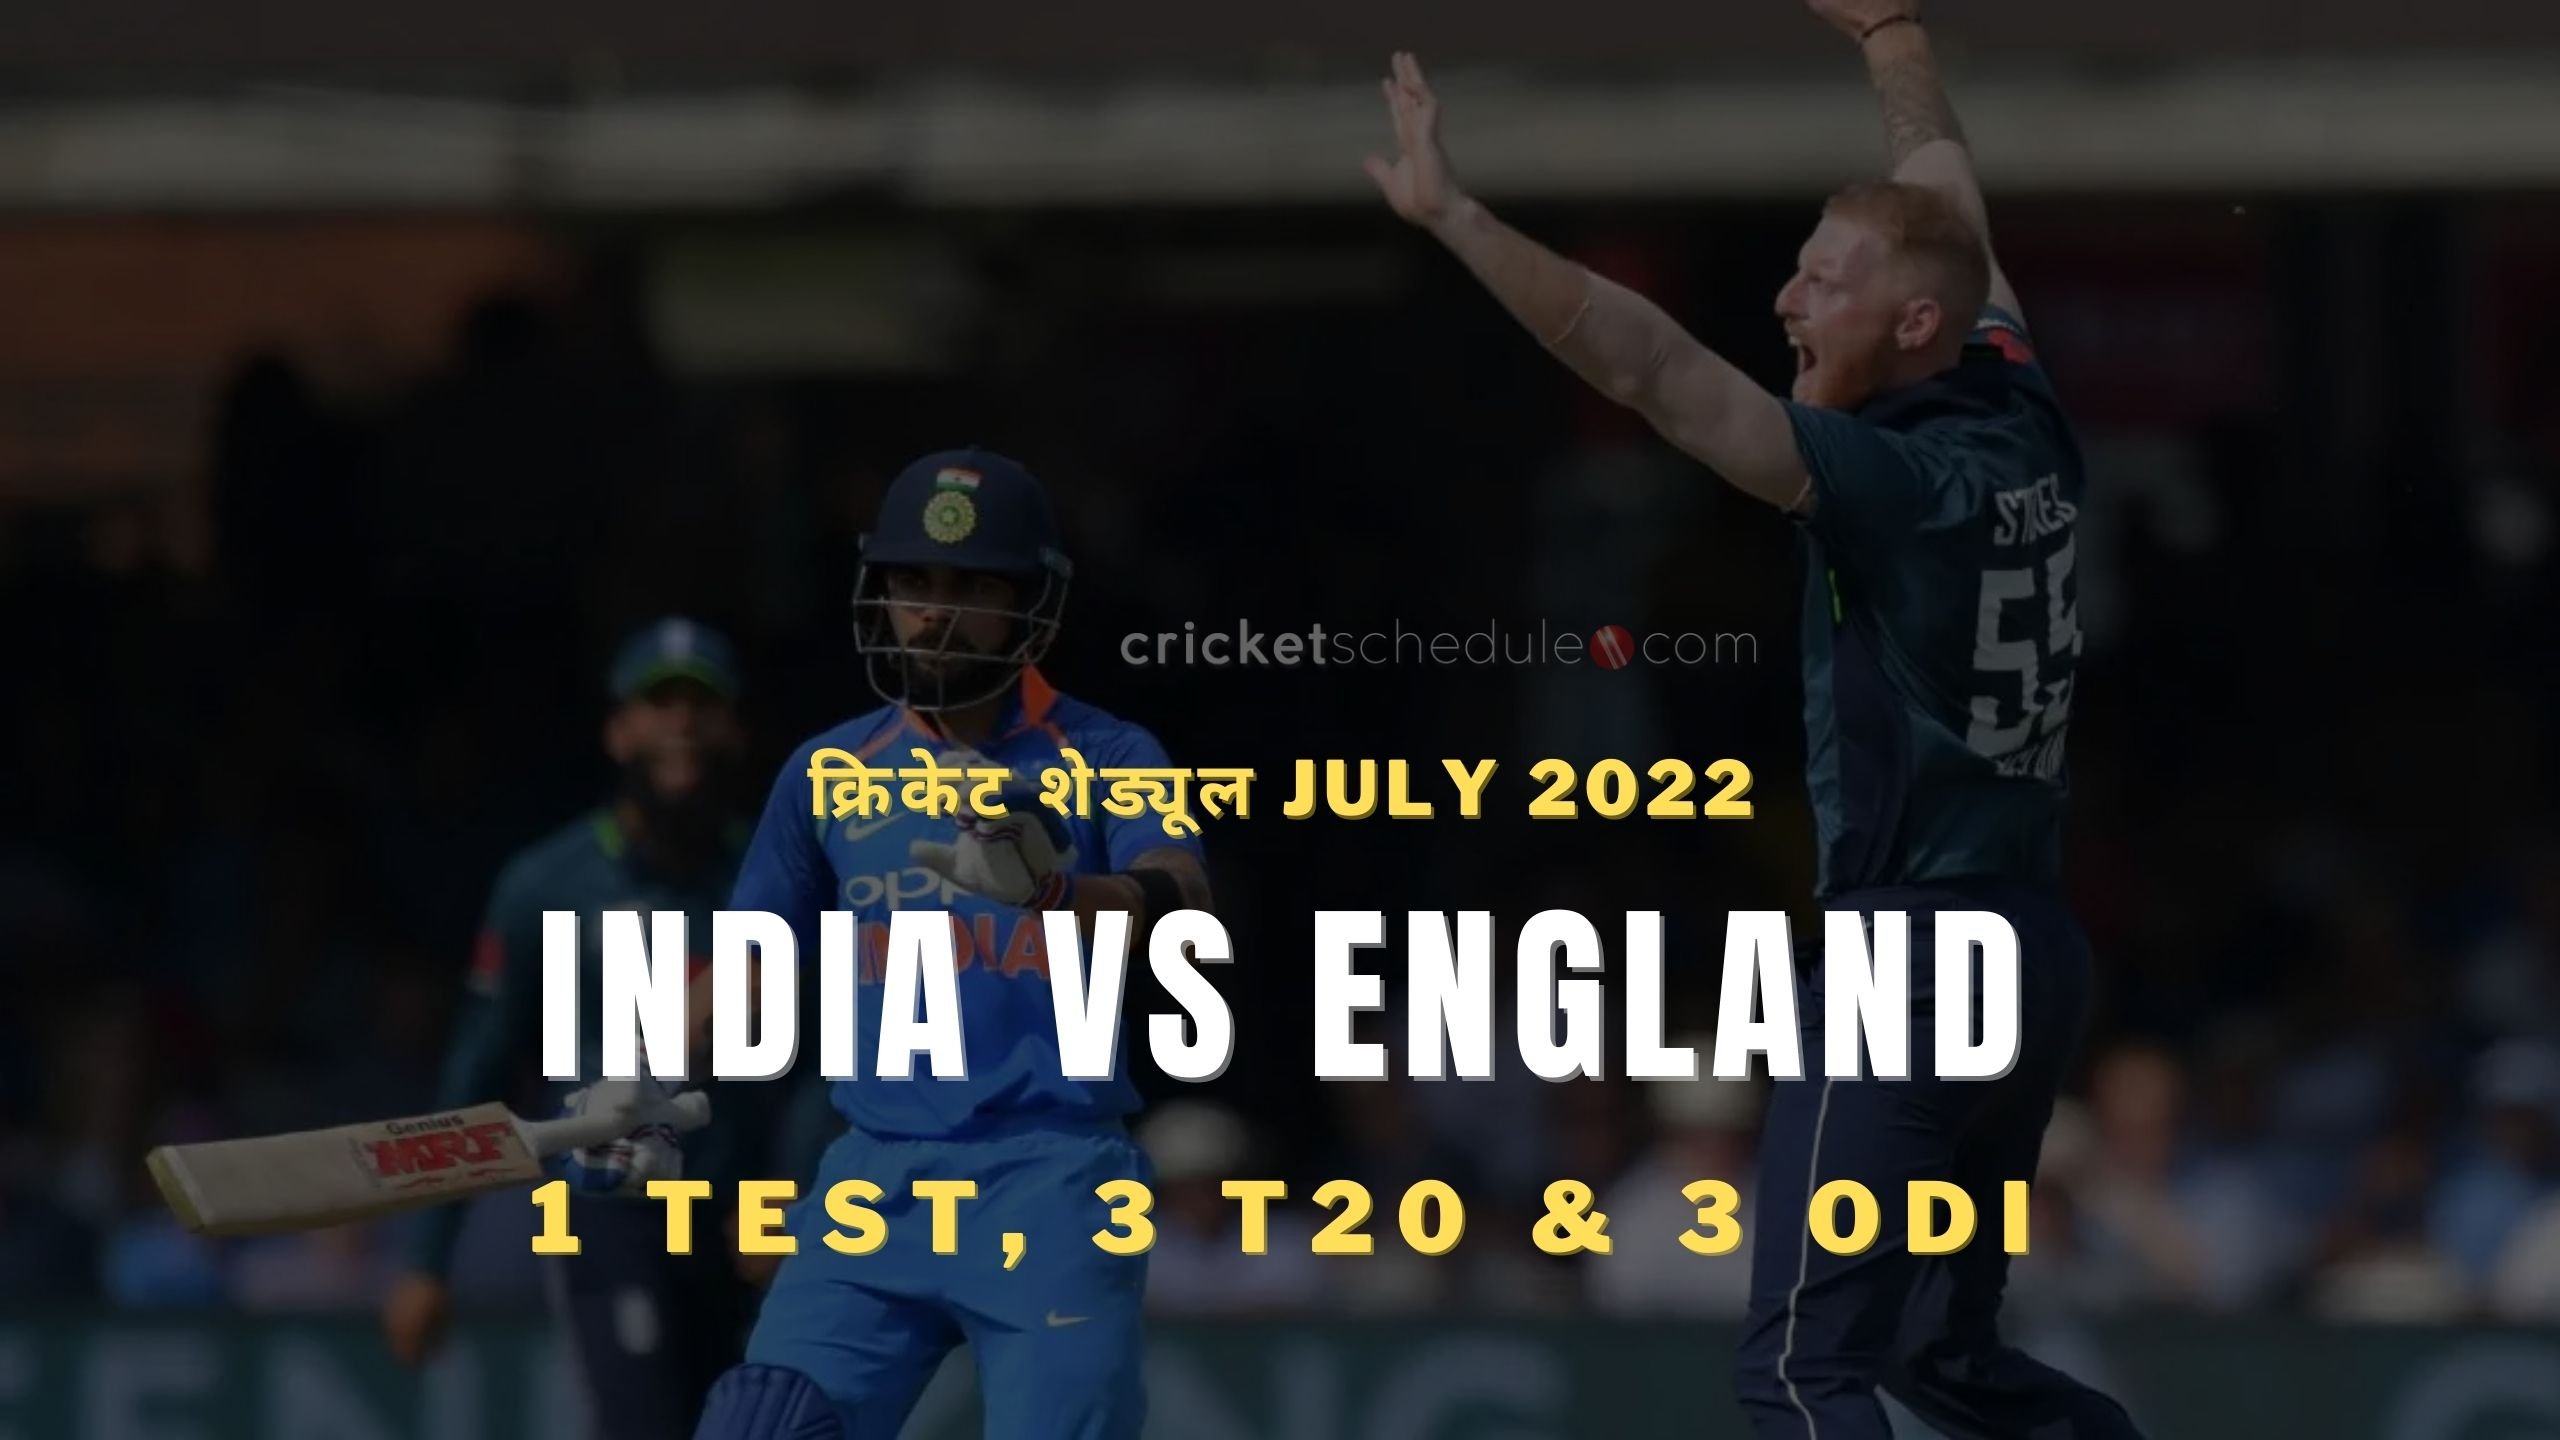 India vs England (IND vs ENG) 2022 series T20, ODI, Test schedule